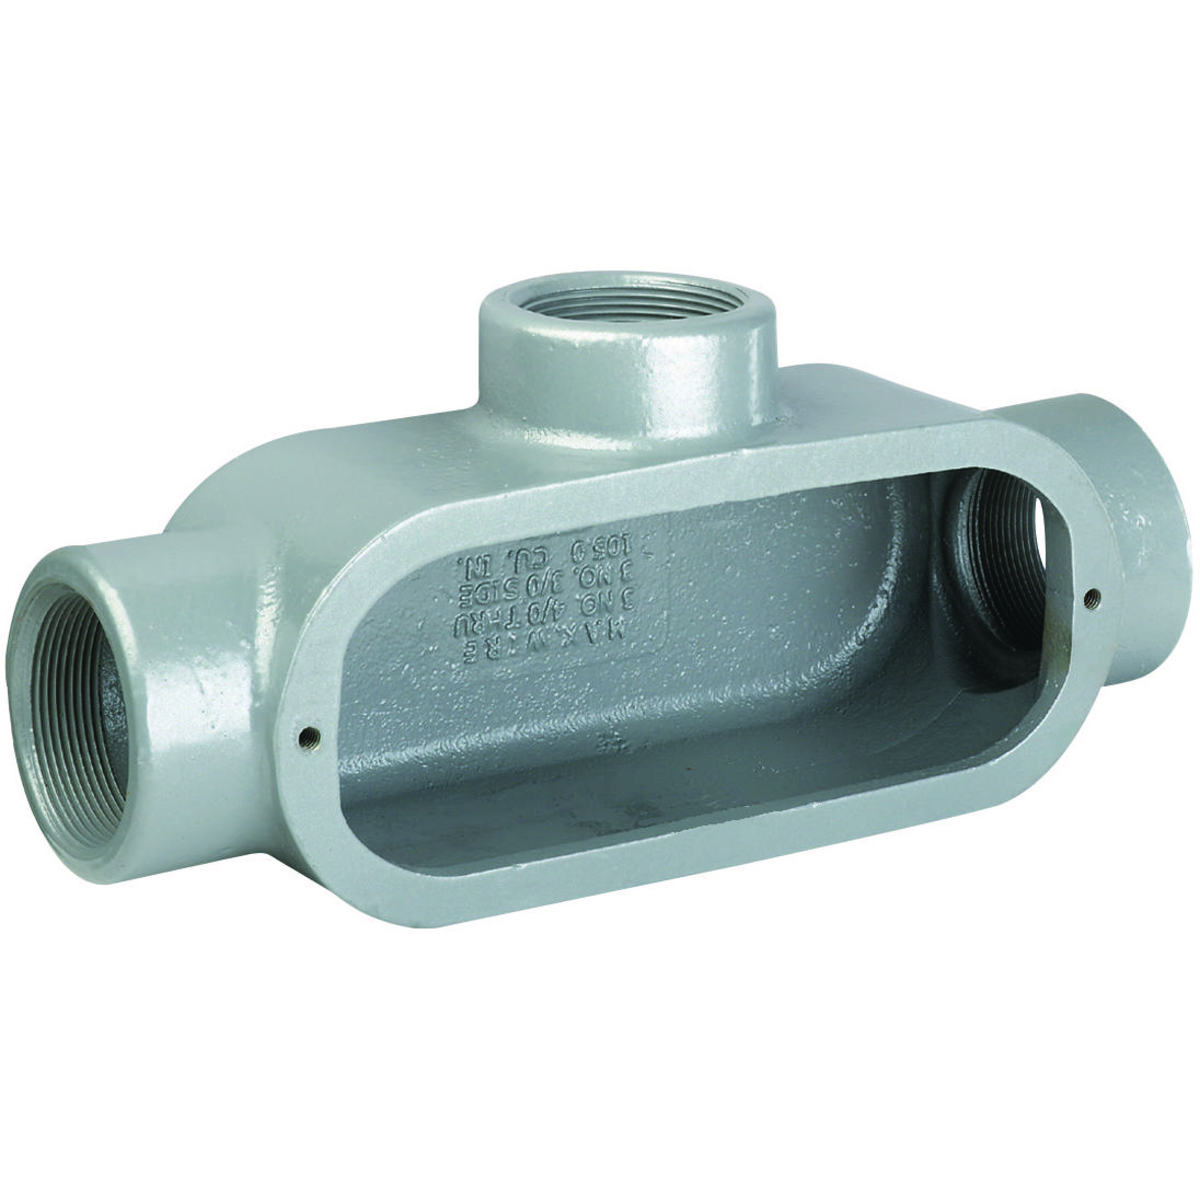 DURALOY 8 SERIES - IRON CONDUIT BODY - T TYPE - HUB SIZE 1 INCH - VOLUME15.0 CUBIC INCHES